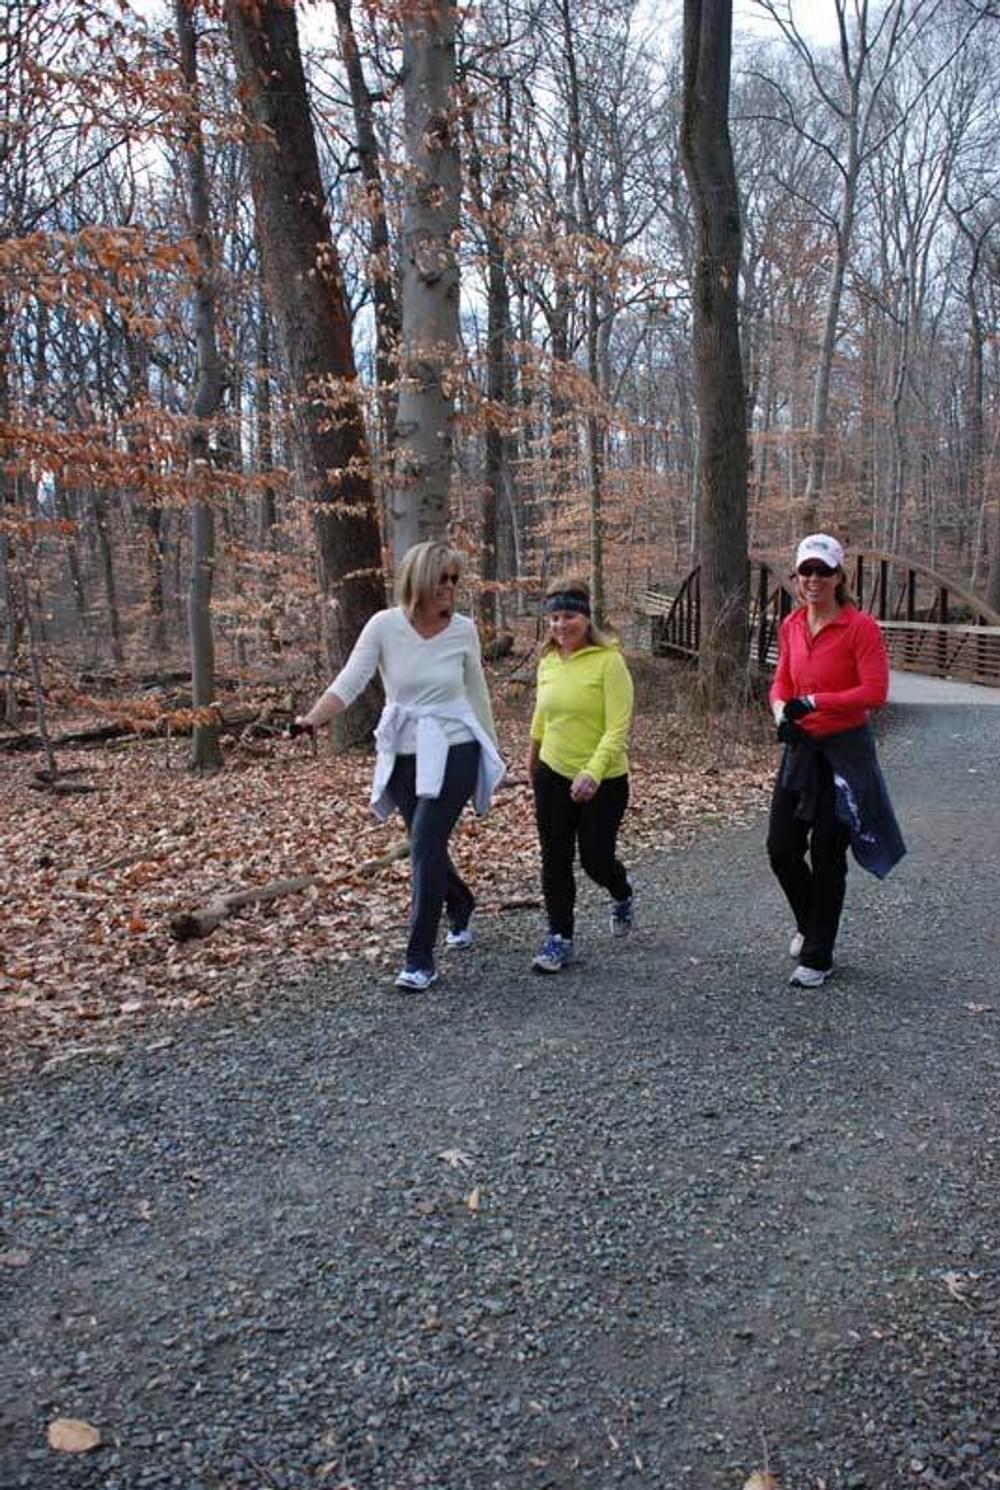  Hikers on the Northern Delaware Greenway Trail in Alapocas Run State Park, Delaware